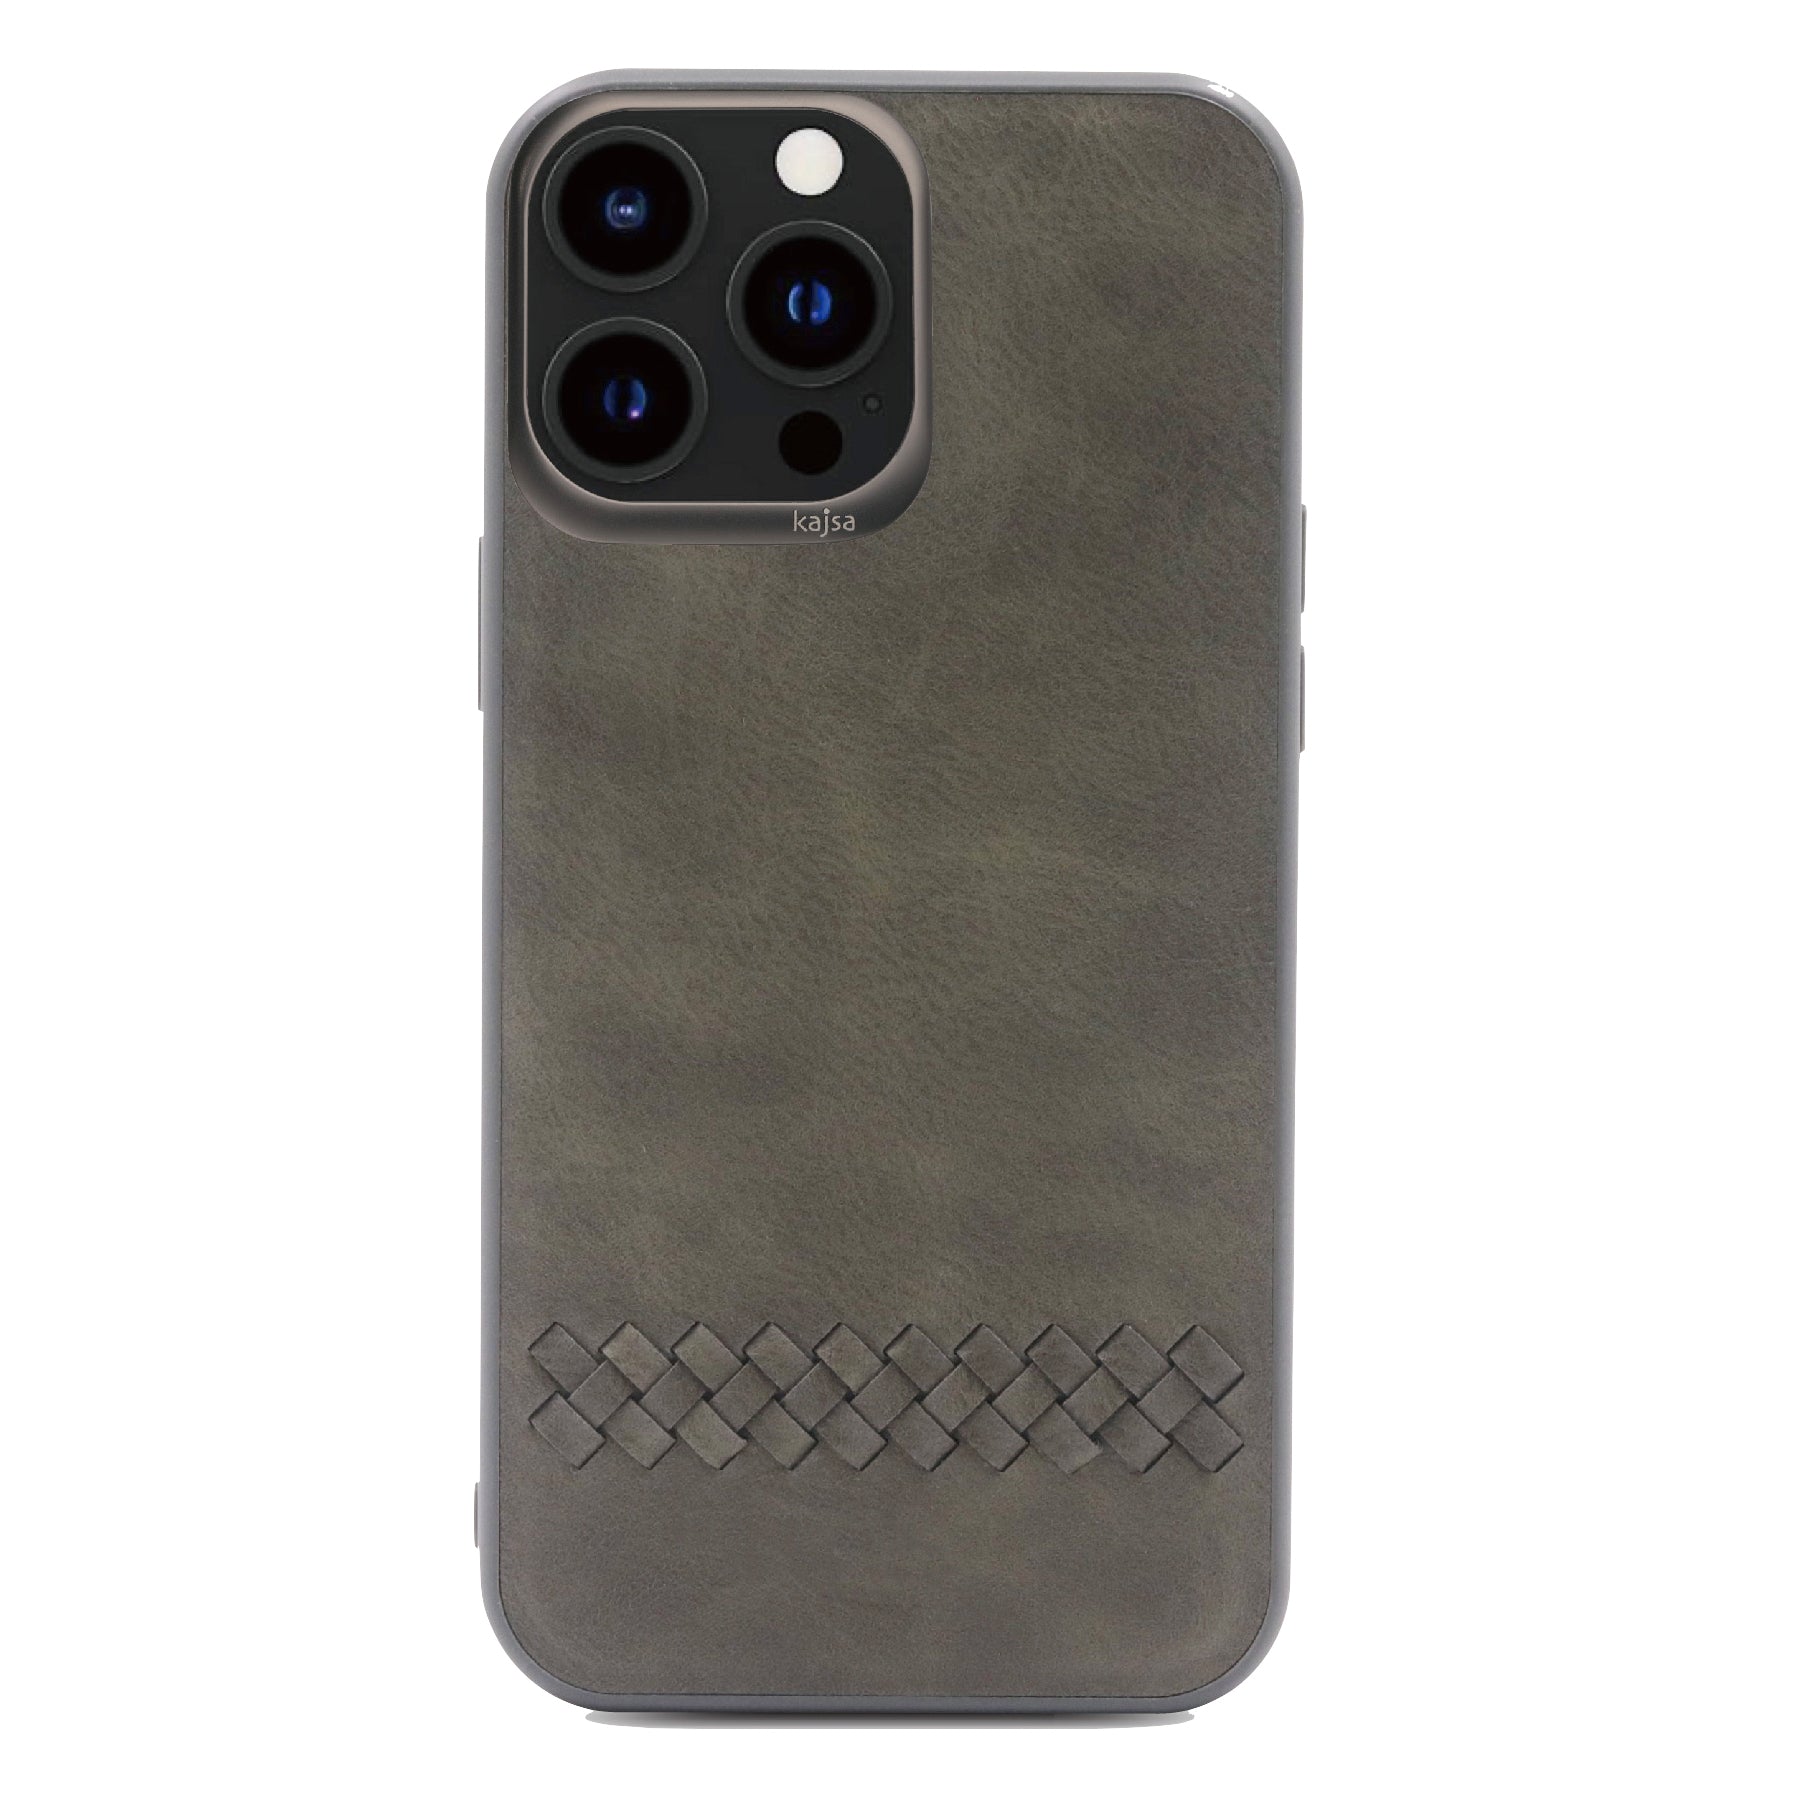 Preppie Collection - Horizontal Weave Back Case for iPhone 13-Phone Case- phone case - phone cases- phone cover- iphone cover- iphone case- iphone cases- leather case- leather cases- DIYCASE - custom case - leather cover - hand strap case - croco pattern case - snake pattern case - carbon fiber phone case - phone case brand - unique phone case - high quality - phone case brand - protective case - buy phone case hong kong - online buy phone case - iphone‎手機殼 - 客製化手機殼 - samsung ‎手機殼 - 香港手機殼 - 買電話殼